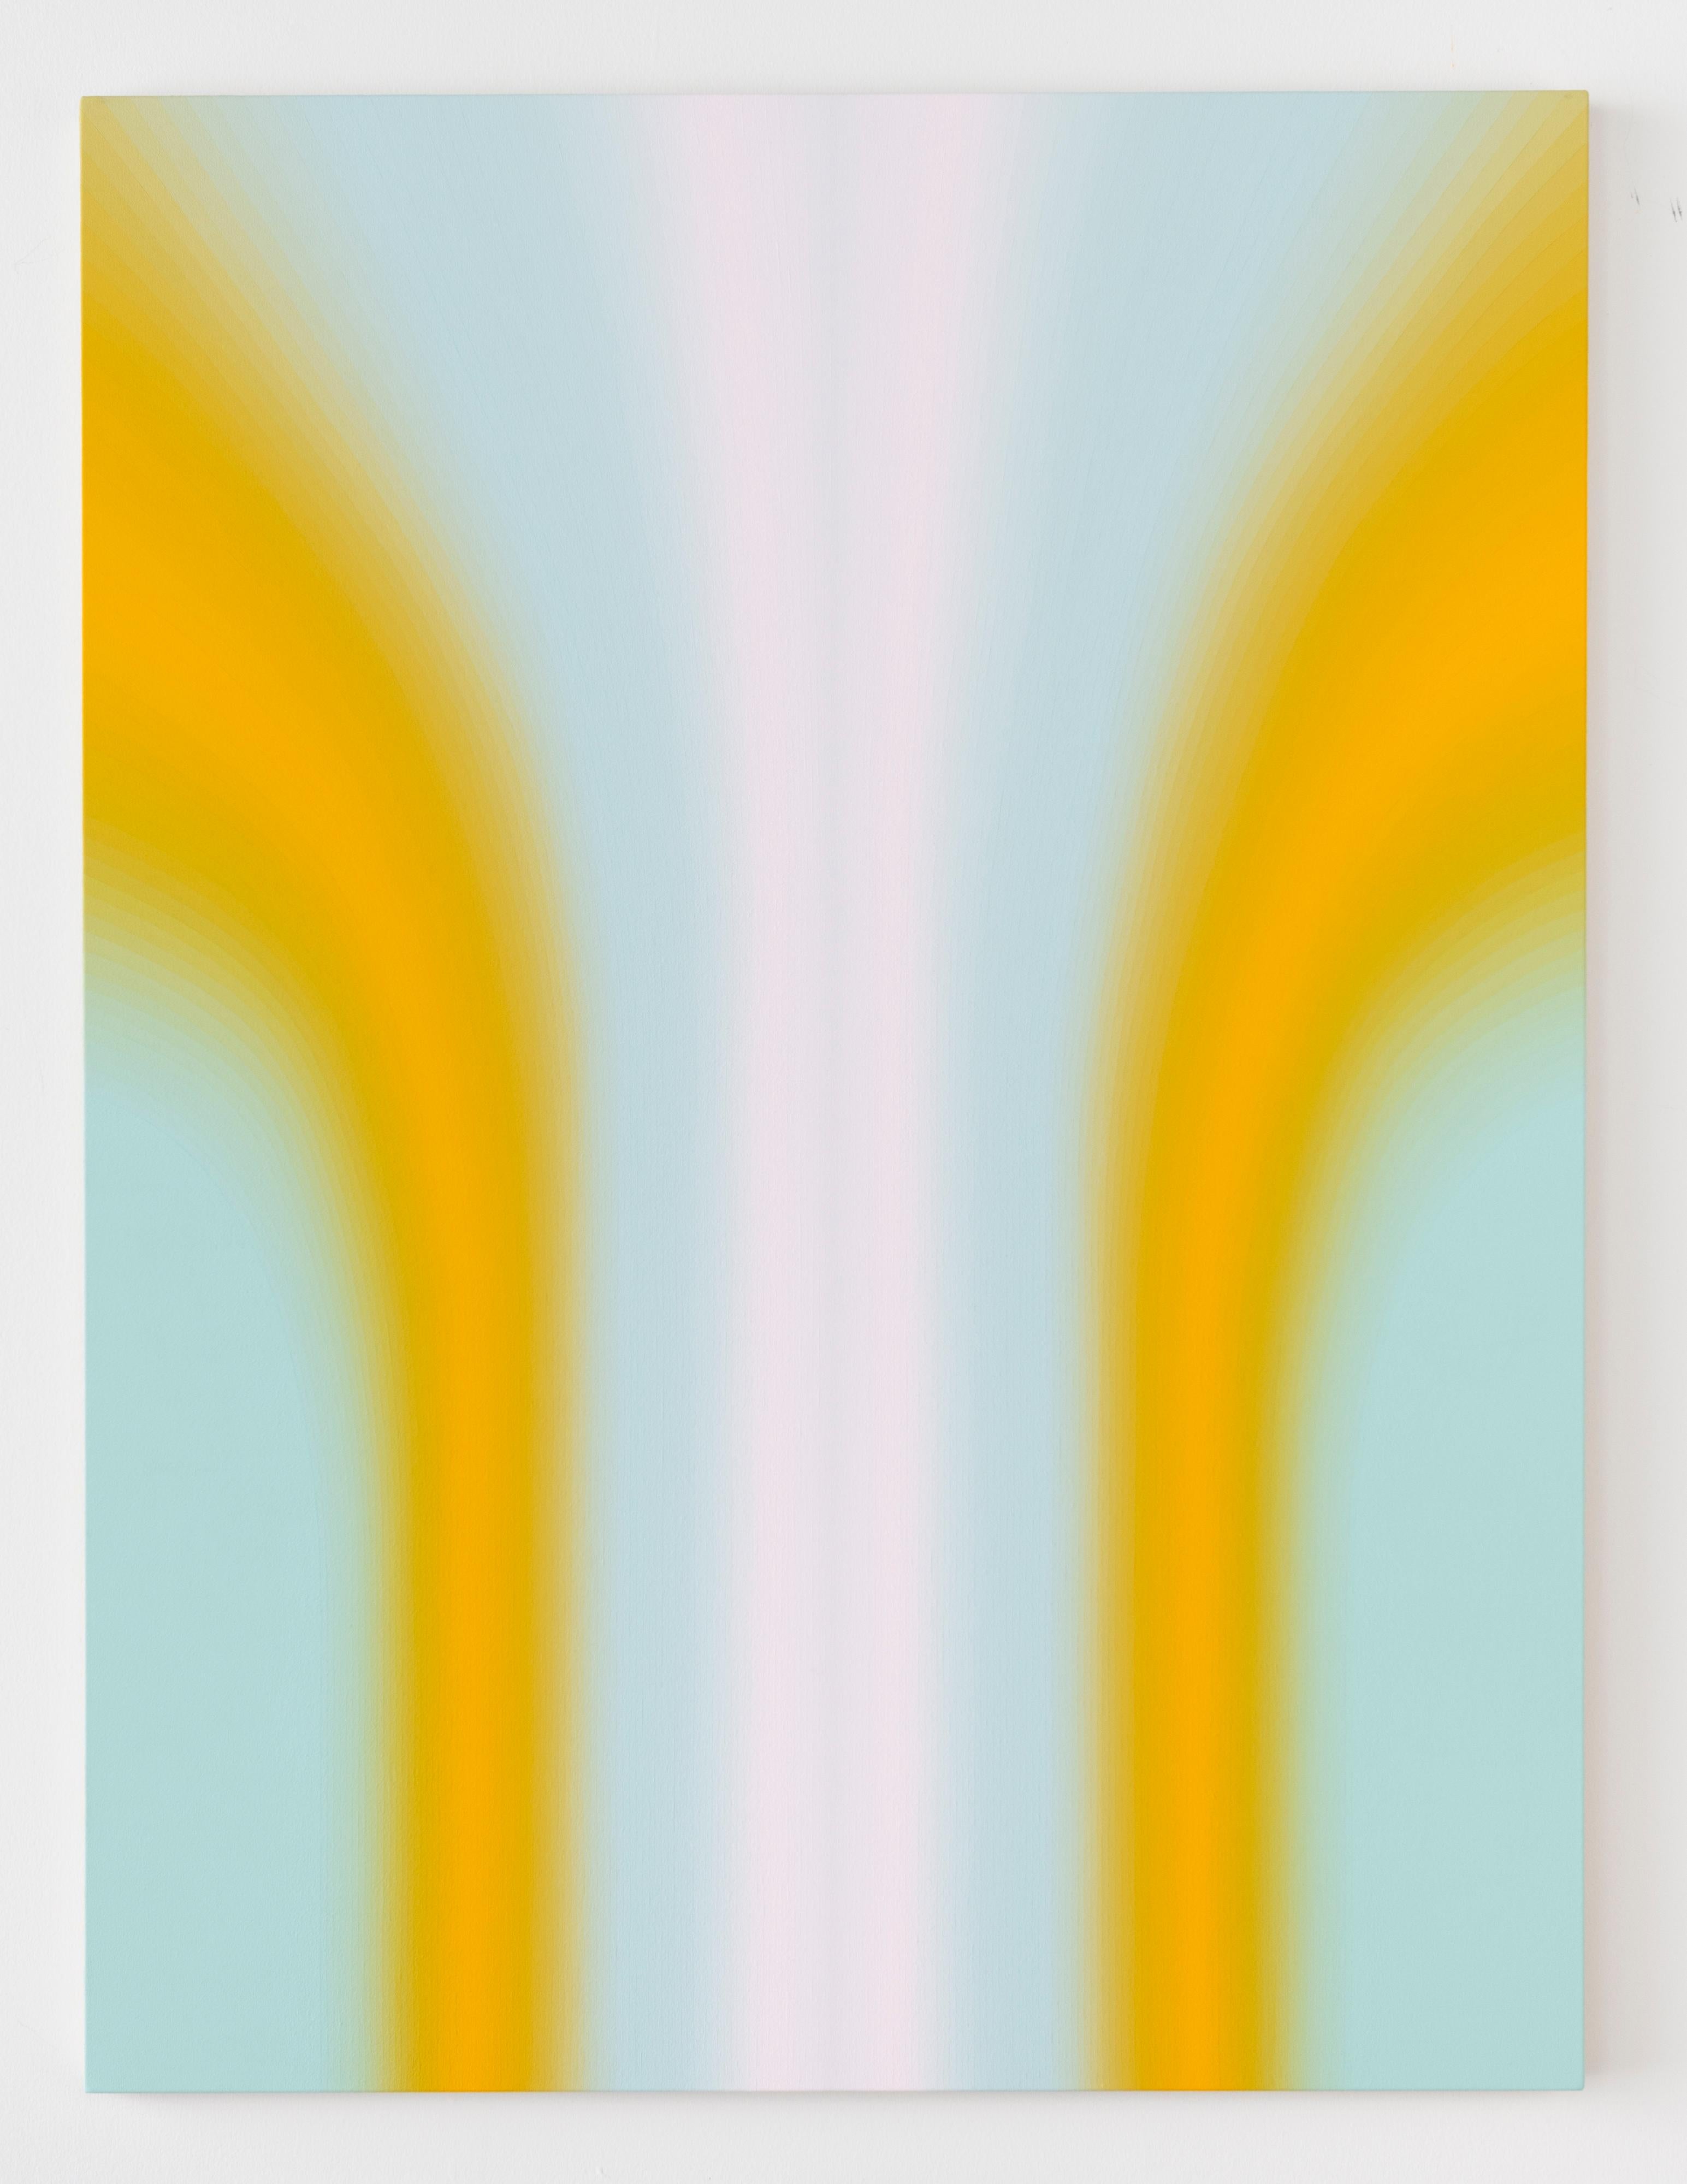 Shadow Valley Six, Light Yellow Orange, Mint Blue, White Gradient Curving Shape - Painting by Audrey Stone